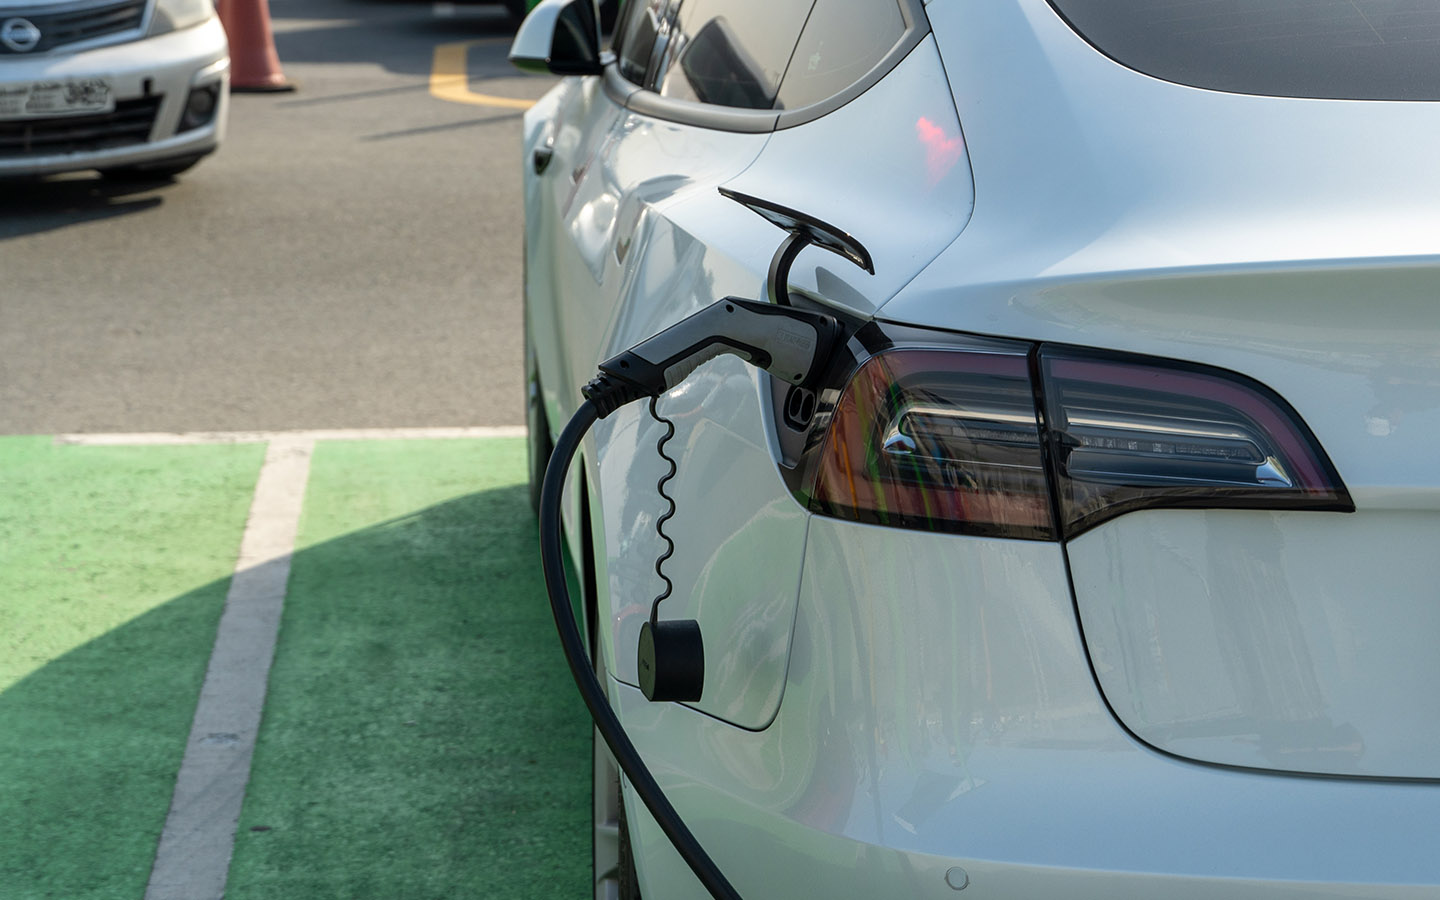 under severe weather conditions, evs lose more charge